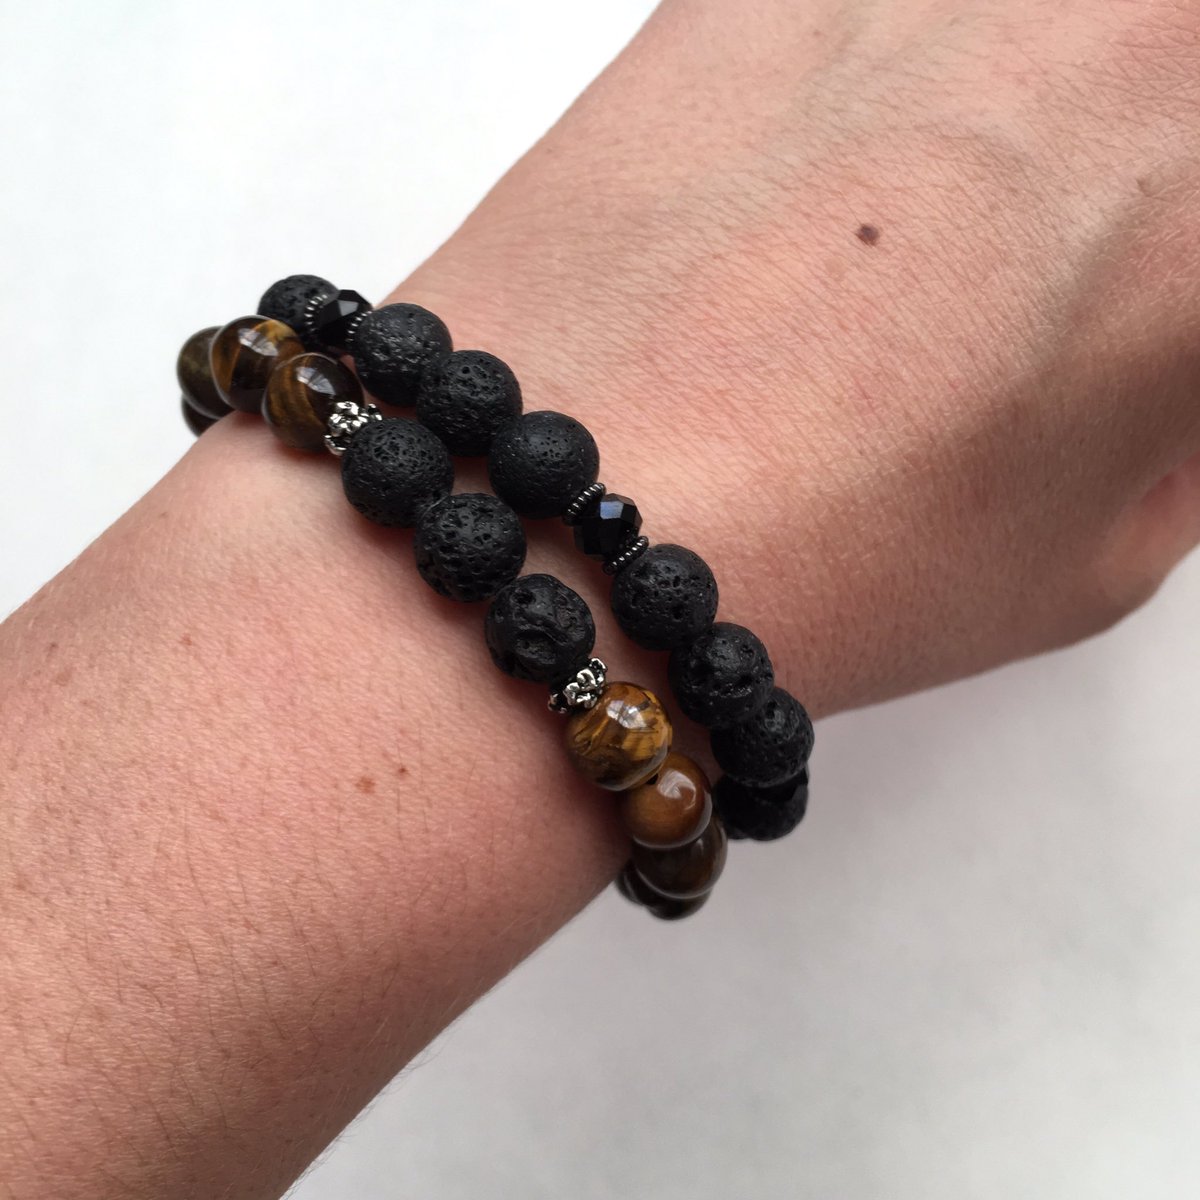 Tigers-eye and lava bead stack. Thinking about including these in a #storysale later this week! Keep your eyes open! 
#sparetimecreator #shopsmall #supportsmallbusiness #bracelets #jewelry #gift #diffuserbracelet #beadedbracelets #stonebeads #Christmasgiftideas #handmadewithJoann